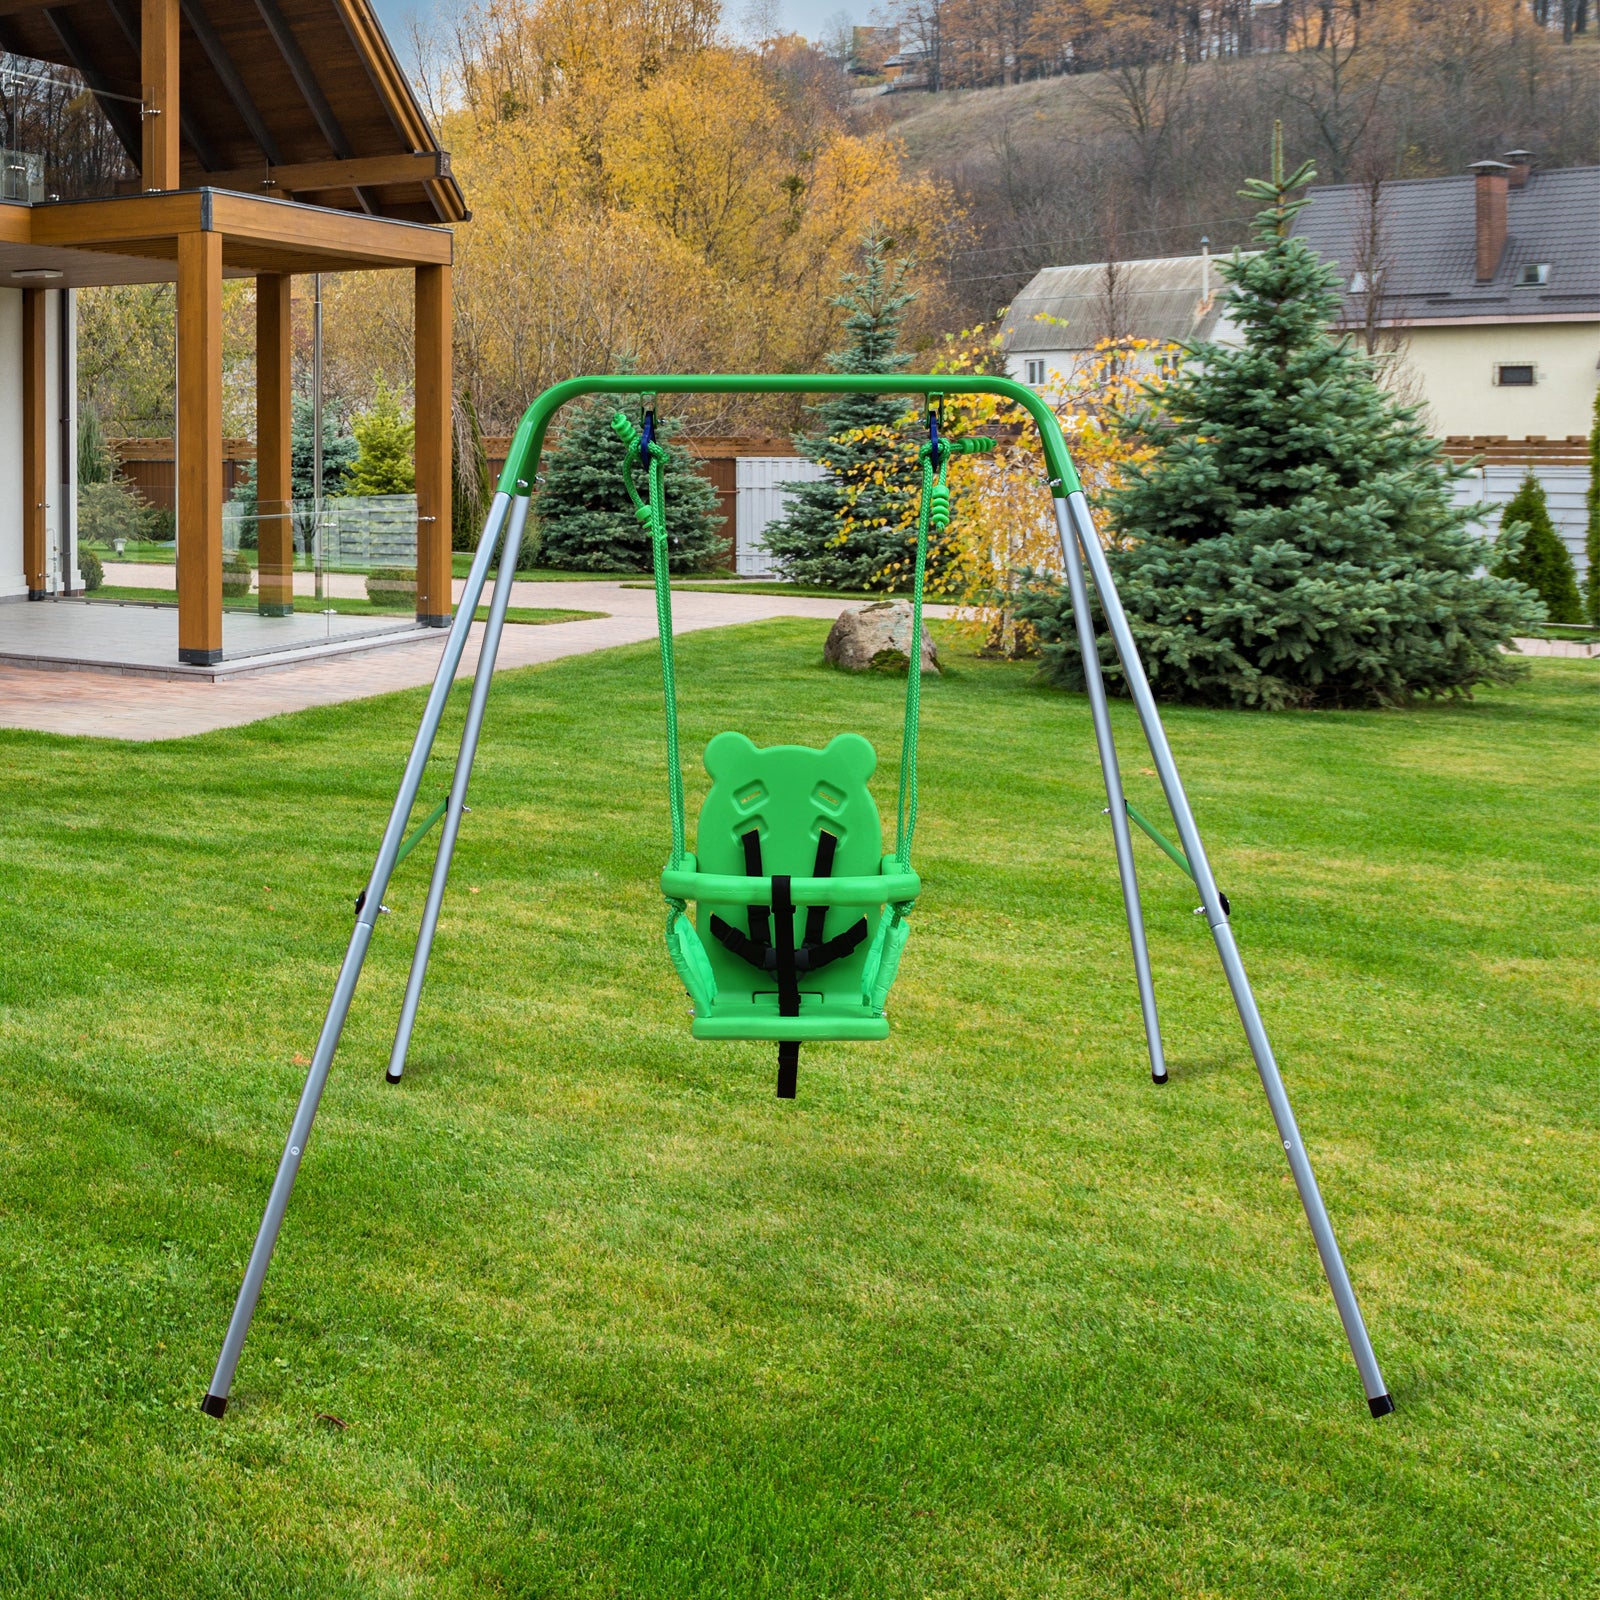 Toddler Baby Swing Set Indoor Outdoor Folding Metal Swing Frame with Safety Harness and Handrails for Backyard - Tonkn